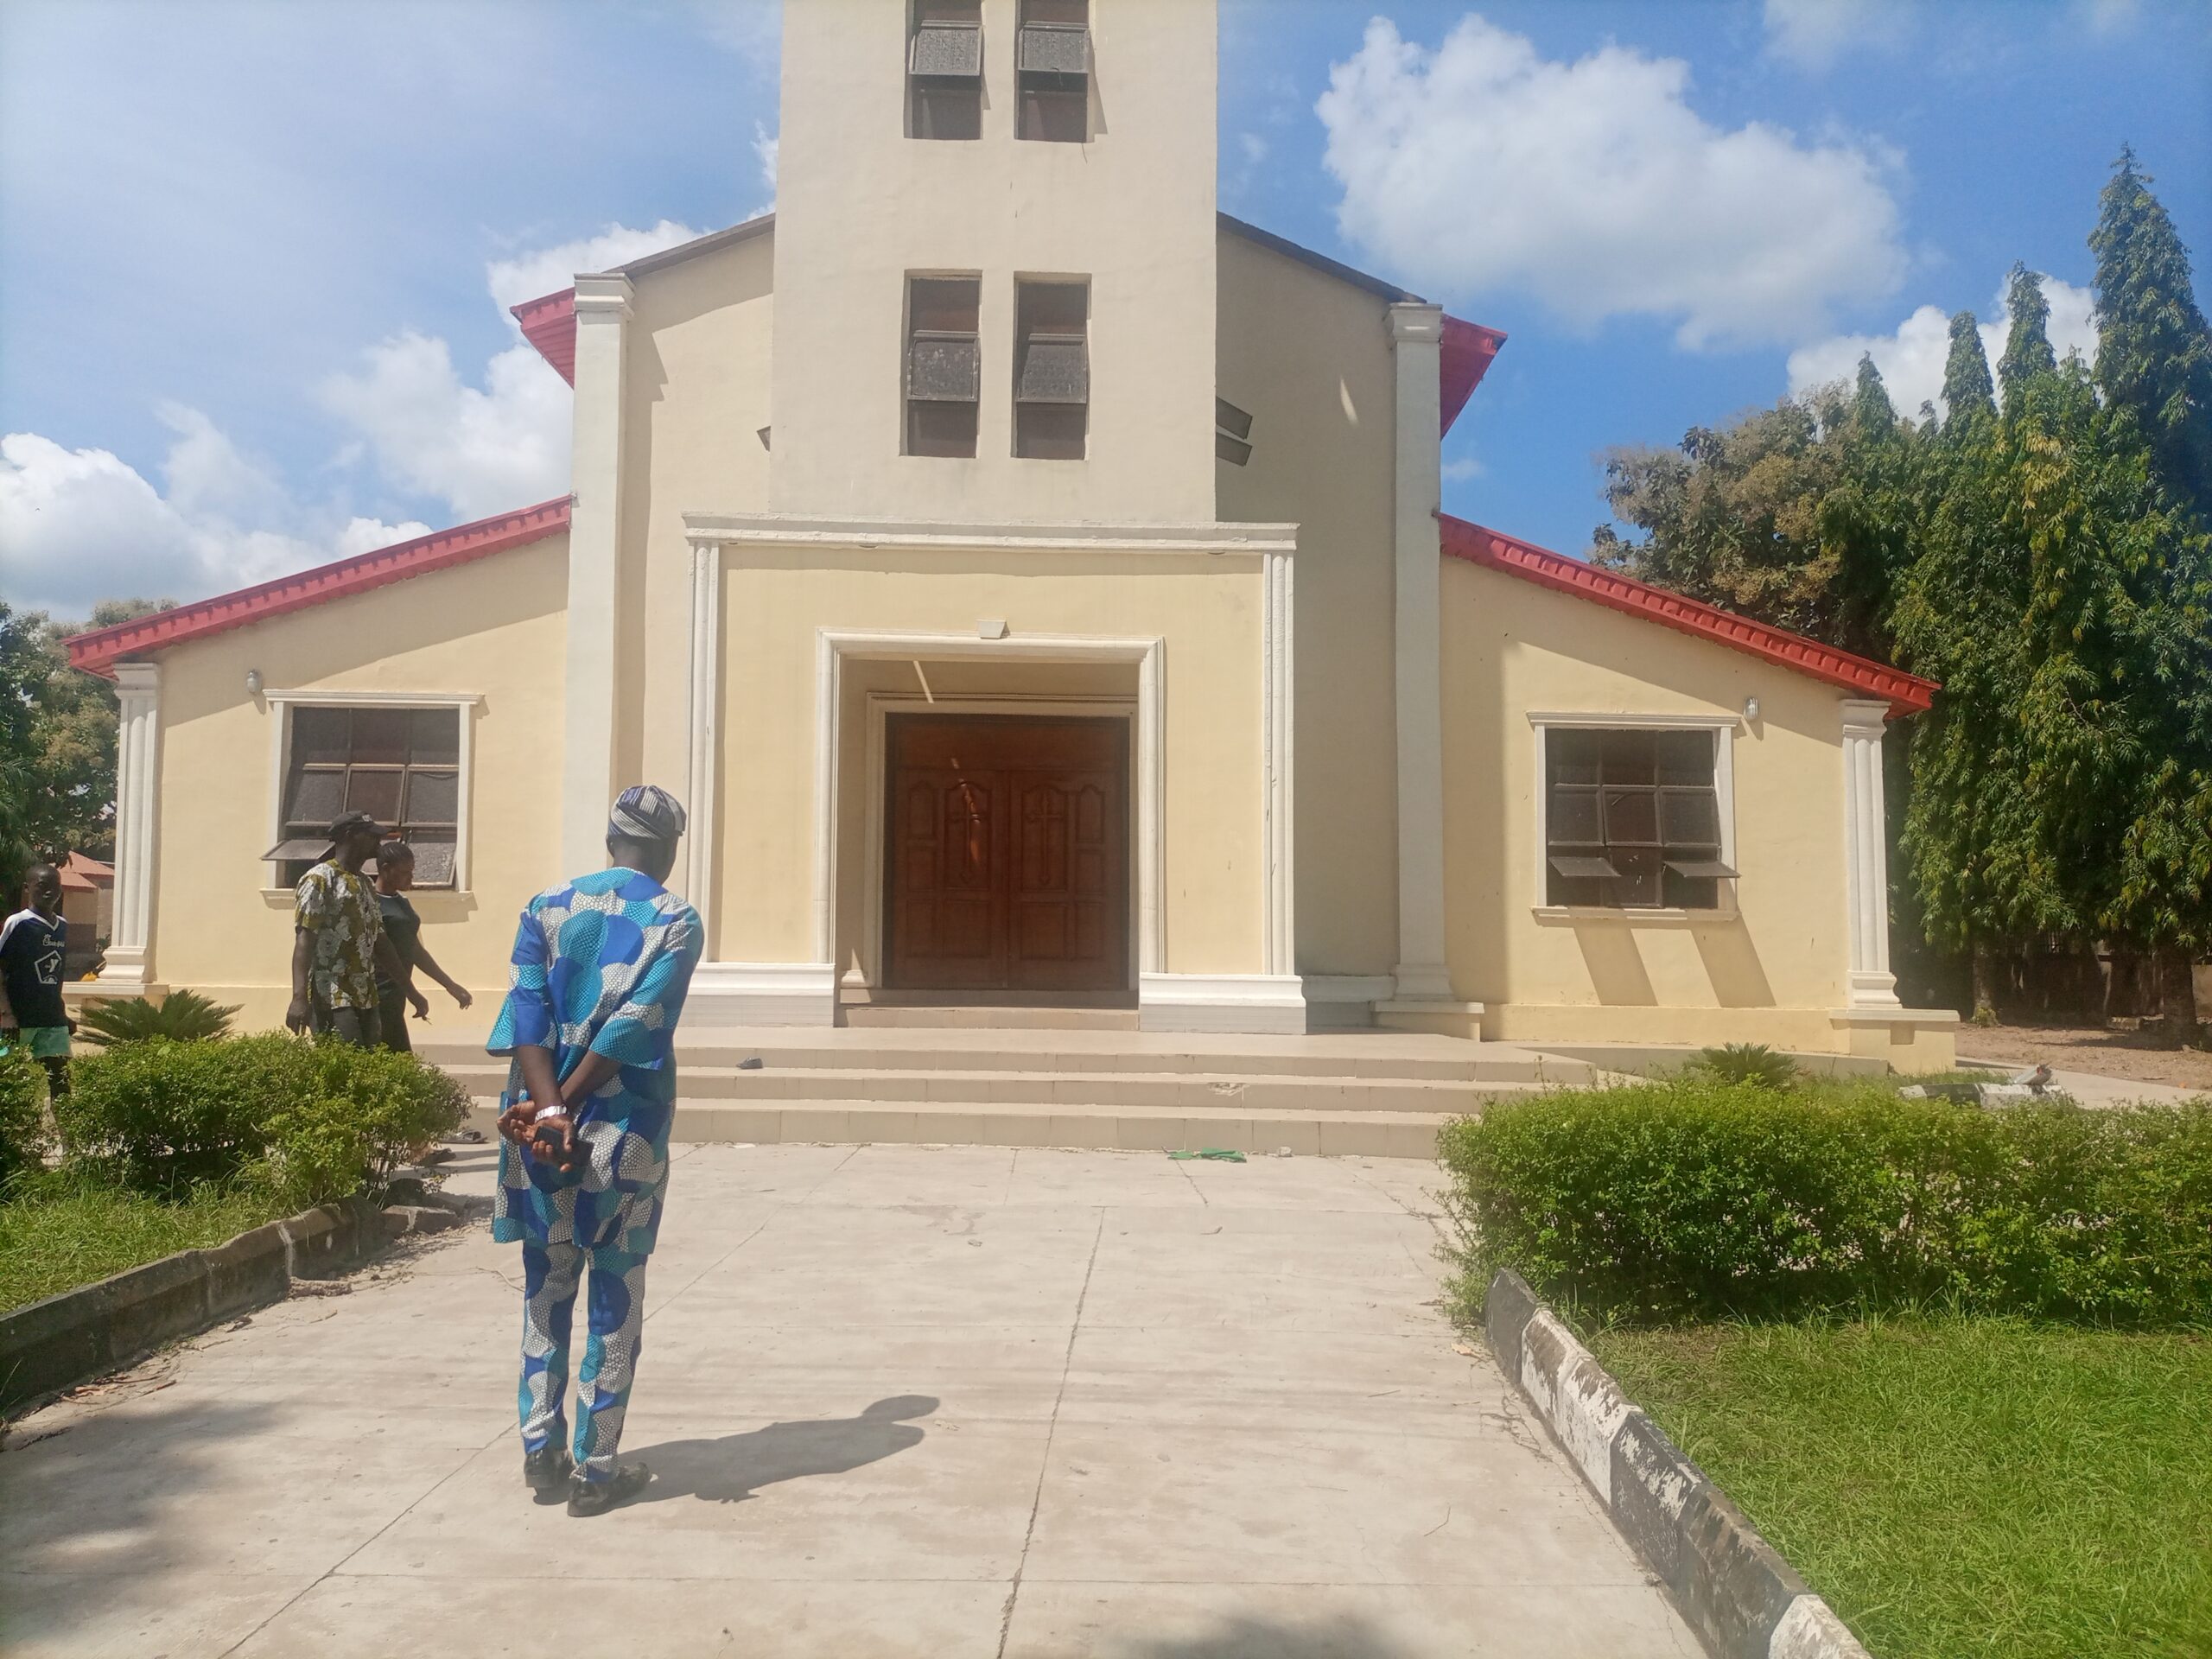 Front view of Saints Francis Catholic church, Owo, venue of the unprovoked killings of Christian worshippers during mass on Sunday.